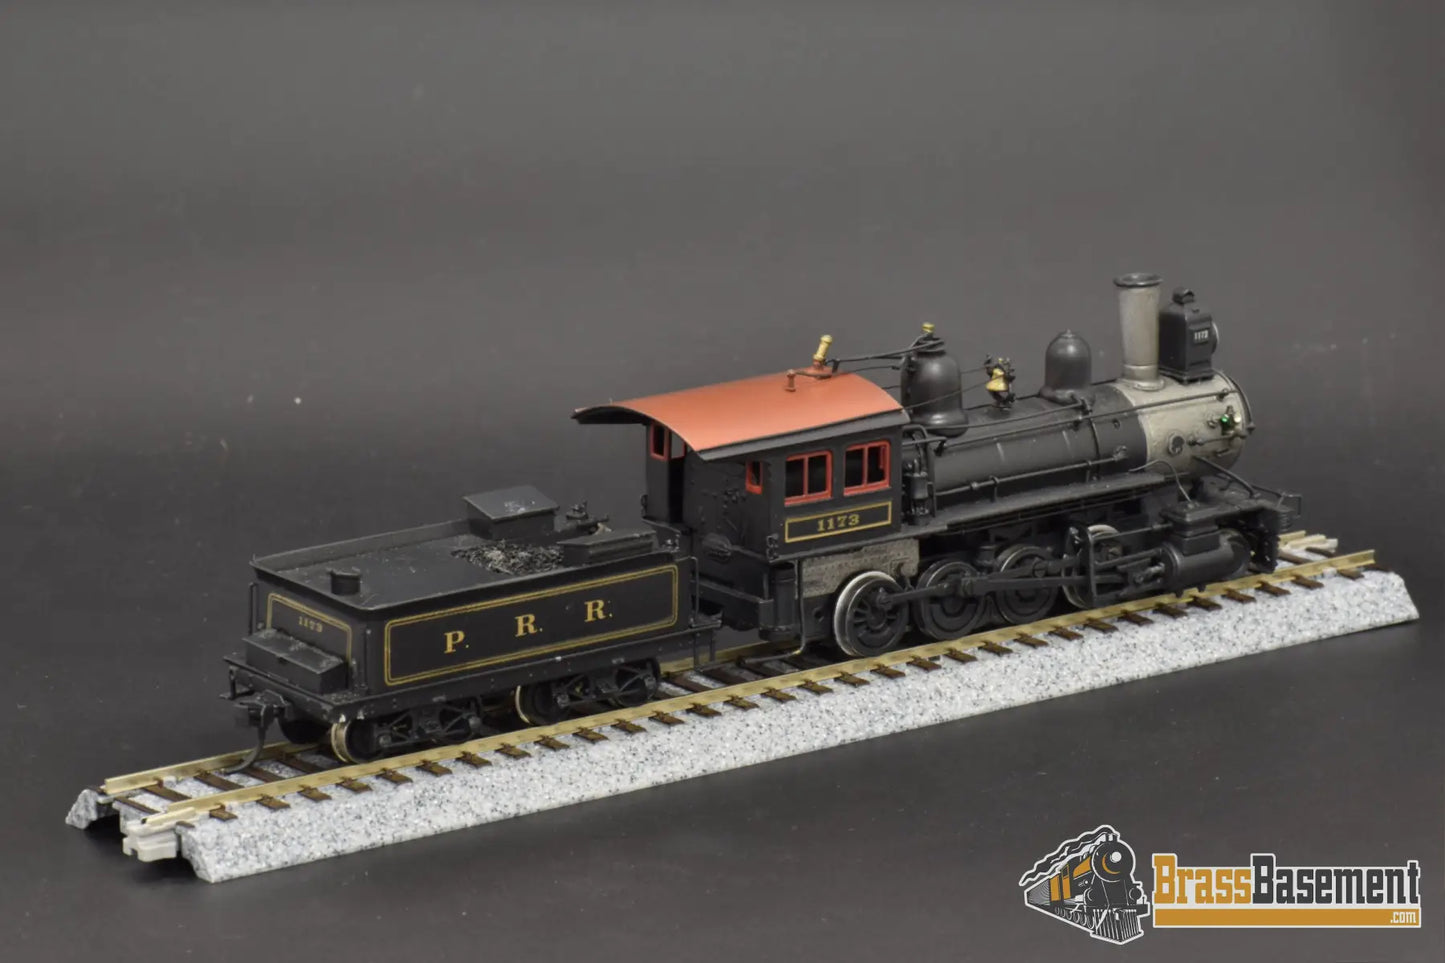 Ho Brass - Empire Midland H - 3 2 - 8 - 0 #1173 Pro Painted Early Gold Lettering Steam